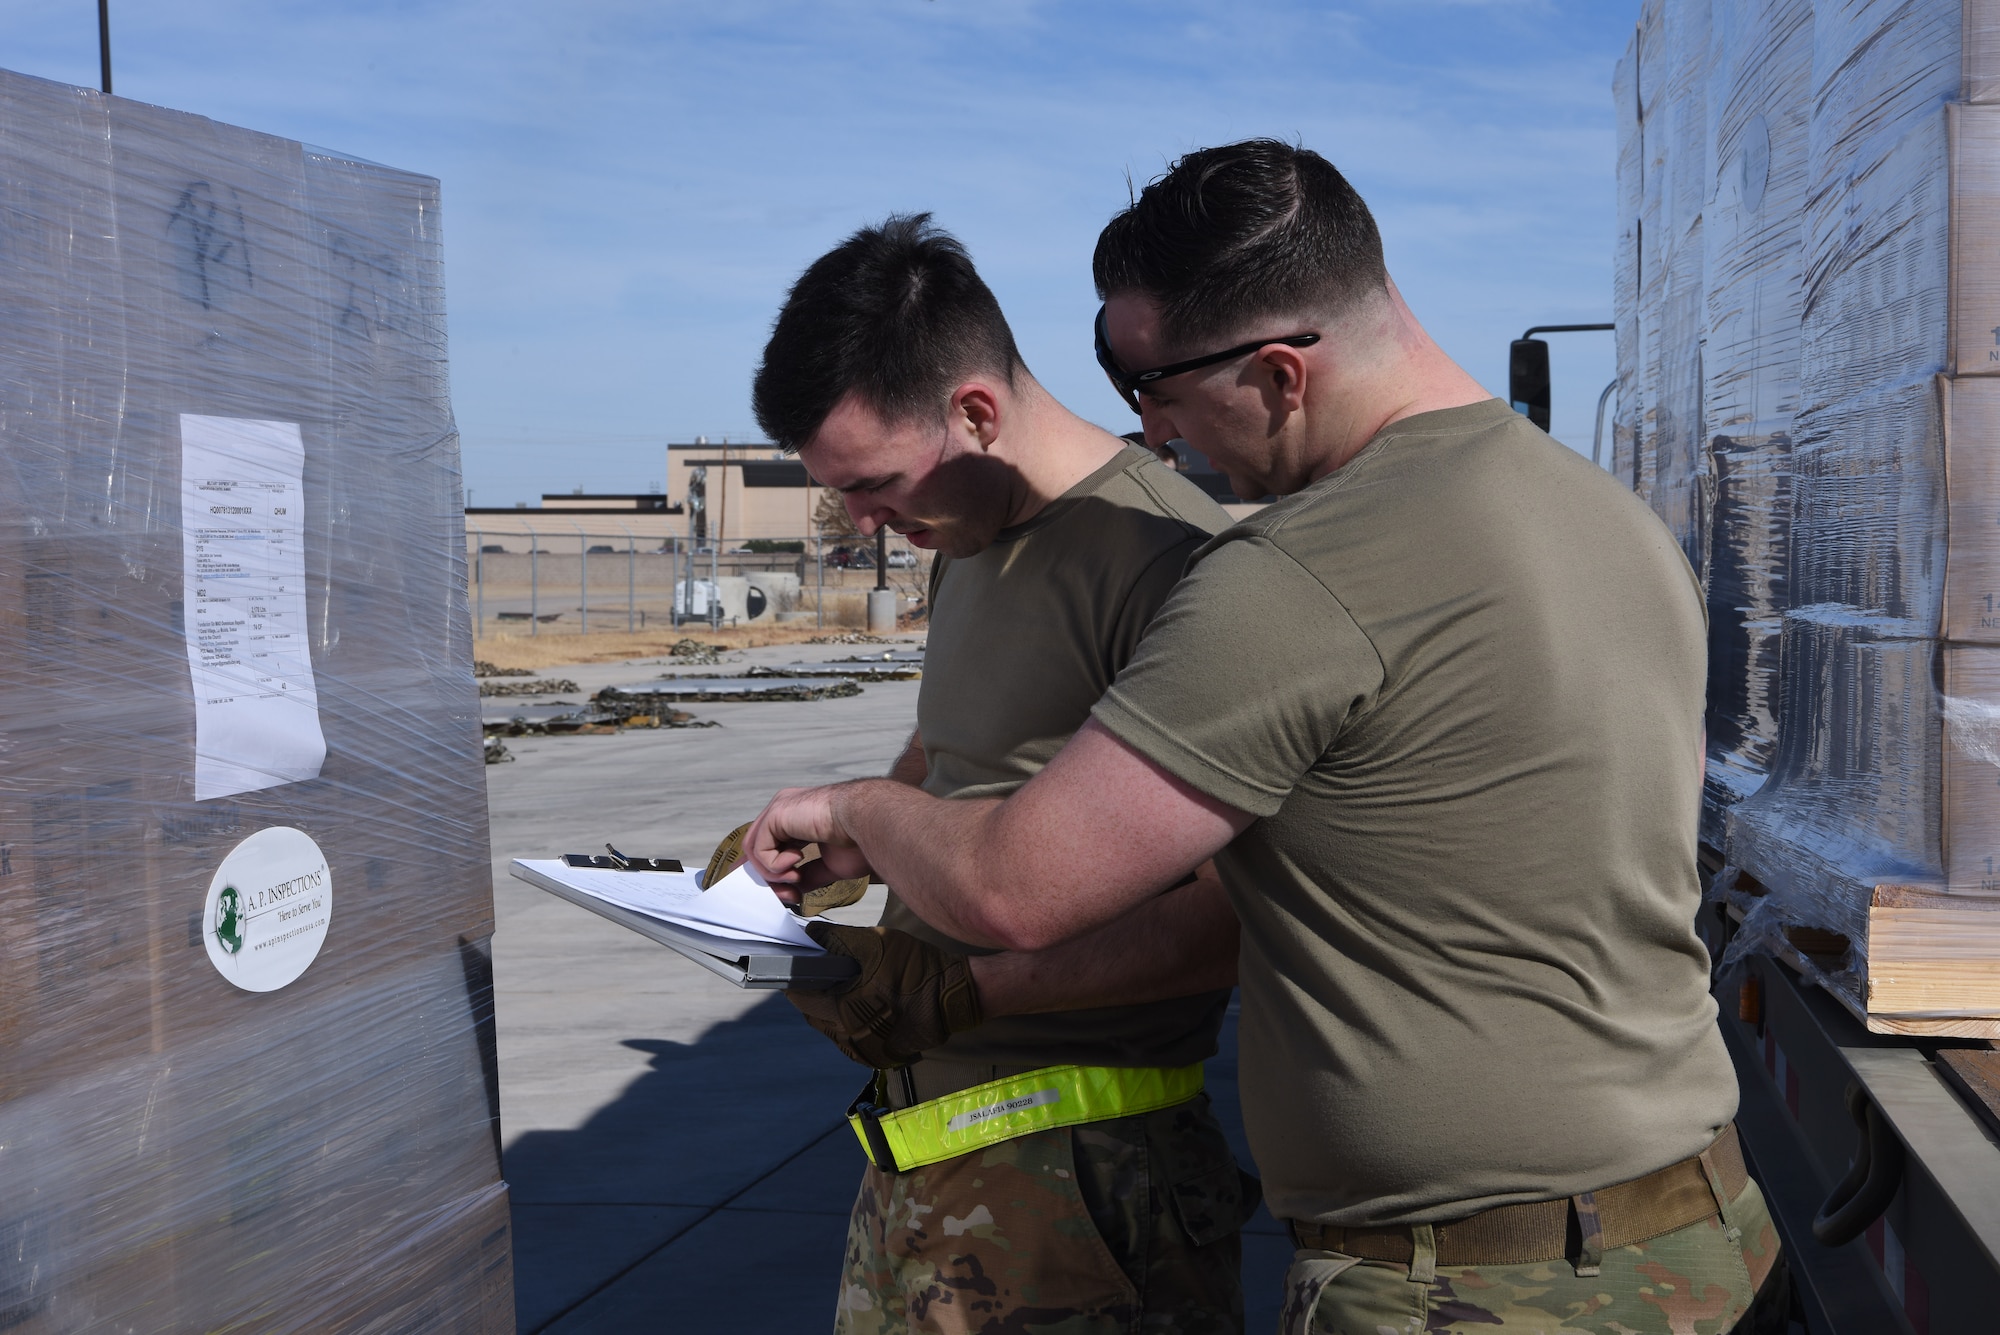 Photo shows two Airmen looking over a clipboard while standing next to a pallet.